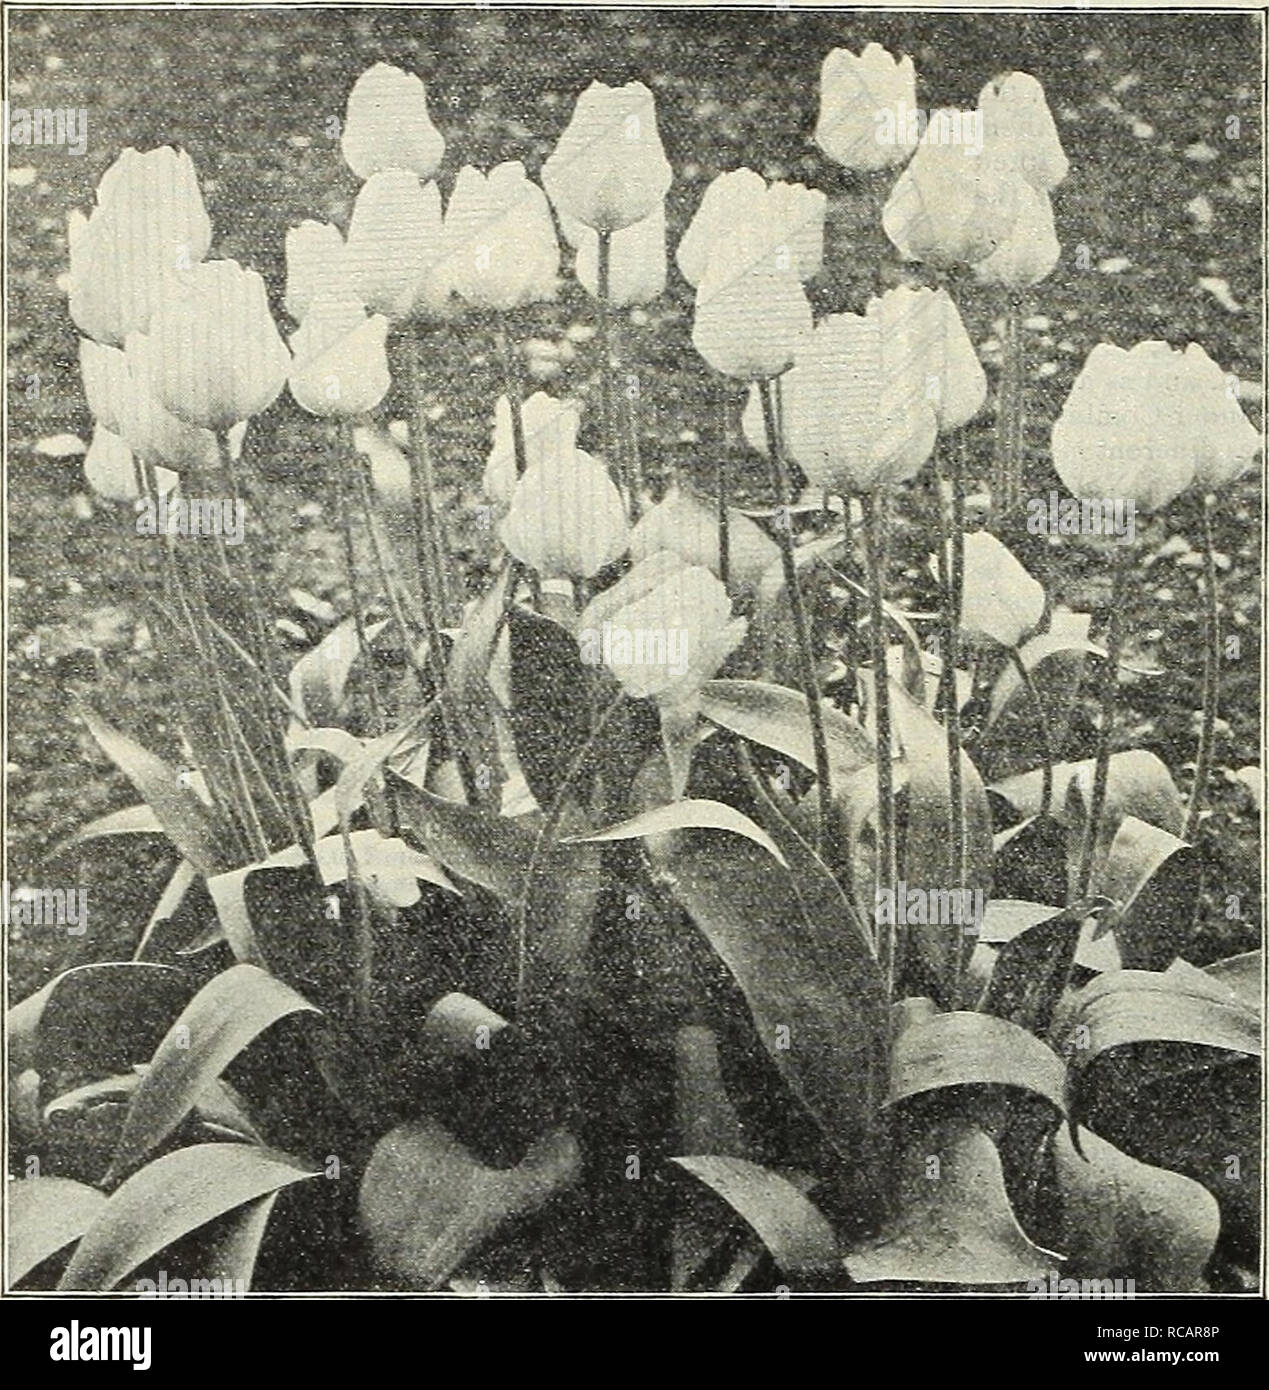 . Dreer's autumn catalogue 1905. Bulbs (Plants) Catalogs; Flowers Seeds Catalogs; Gardening Equipment and supplies Catalogs; Nurseries (Horticulture) Catalogs; Fruit Seeds Catalogs; Vegetables Seeds Catalogs. Henry A. Dreer, Pliiladelpliia, Pa. SINGLE EARLY TULIPS.. SntGLE Early Tulip La Rhine. ArtuS. BriL,'ht scarlet; fiie for forcing or Doz. l&gt;el.!iiig. S12.50 p--r 1000 .gO 25 Belli AllianCS. B;-is;nt scjr^ct; fine forcer an 1 i-.sJler. §22 00 per LOGO 35 Canary Bird. Clear yellow; very early.. 30 ChrysolDra. G )lden-yellov; fine larj;e rio'.vir; haen 25 Rose , .^5 White 35 Yell .-.v 35  Stock Photo